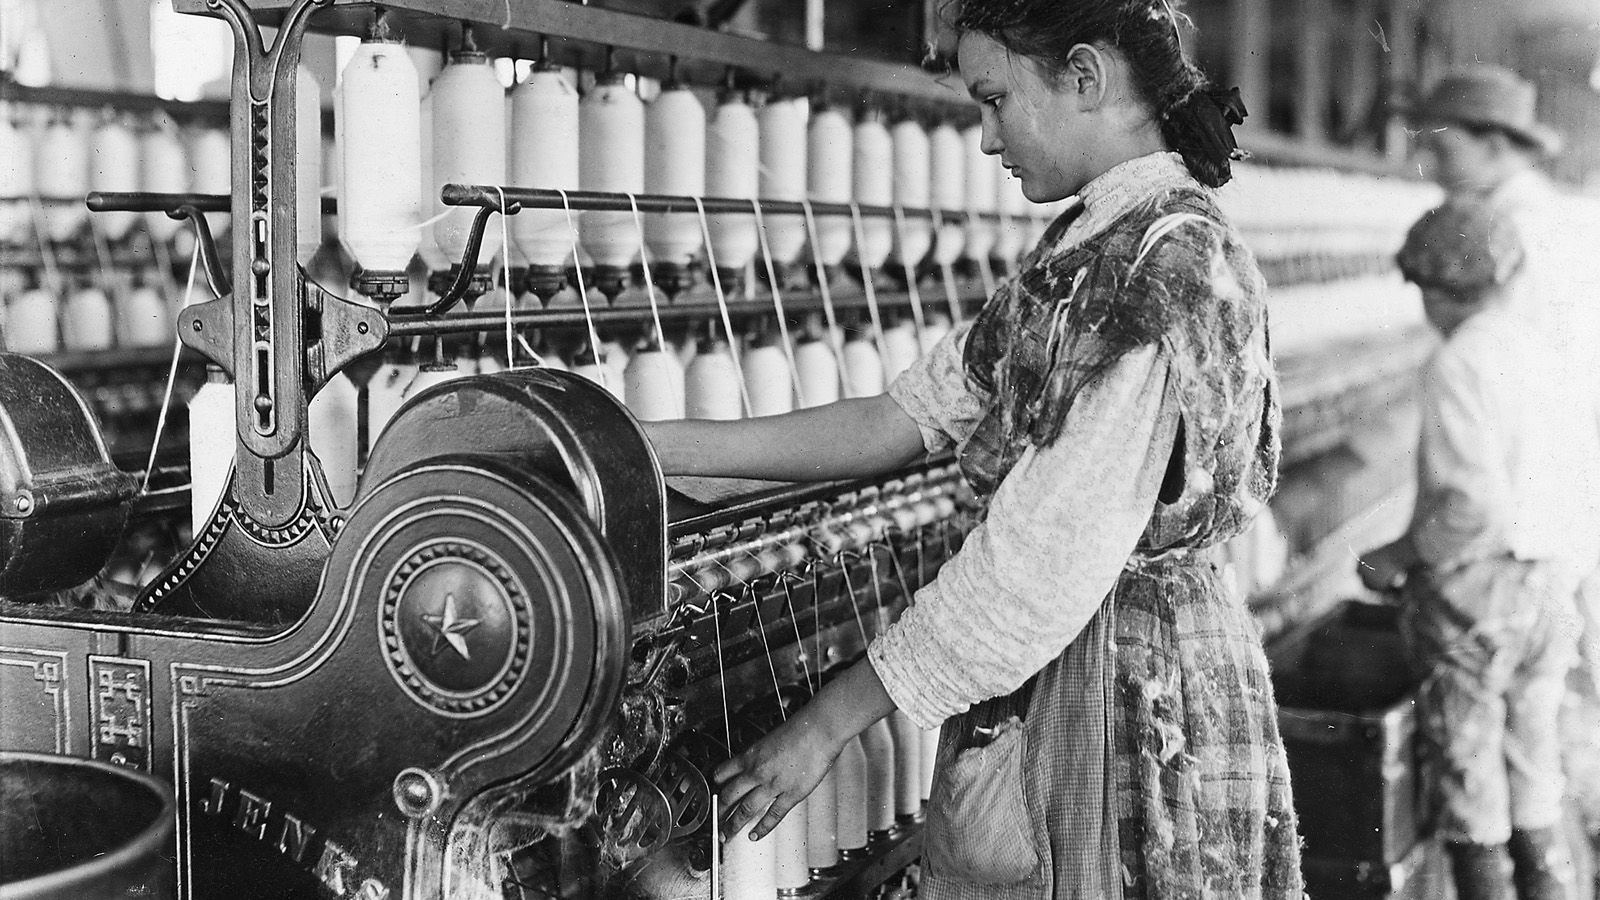 A young girl works the spinning machines, Lewis Hine, Cherryville, NC, 1908.